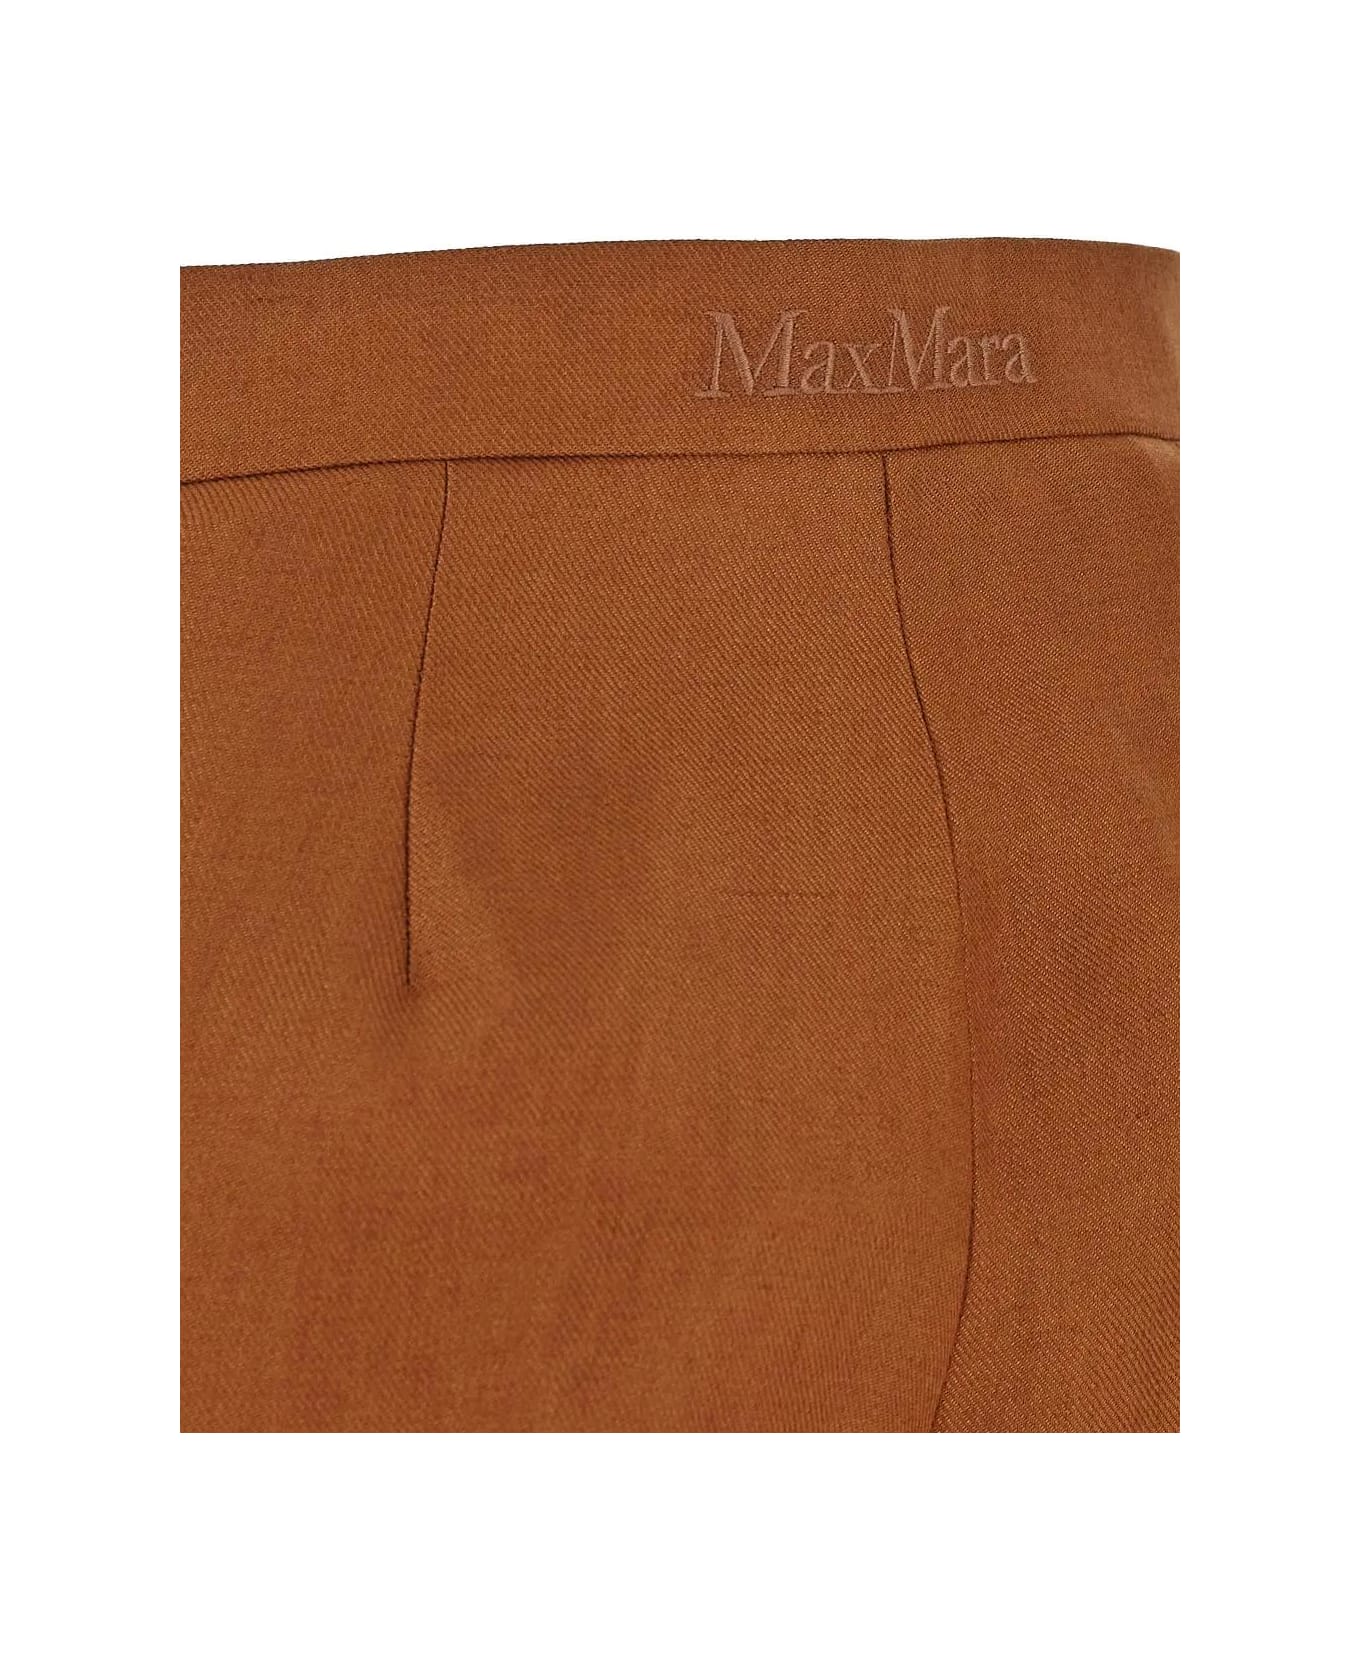 Max Mara Pleated Front Trousers - MARRONE